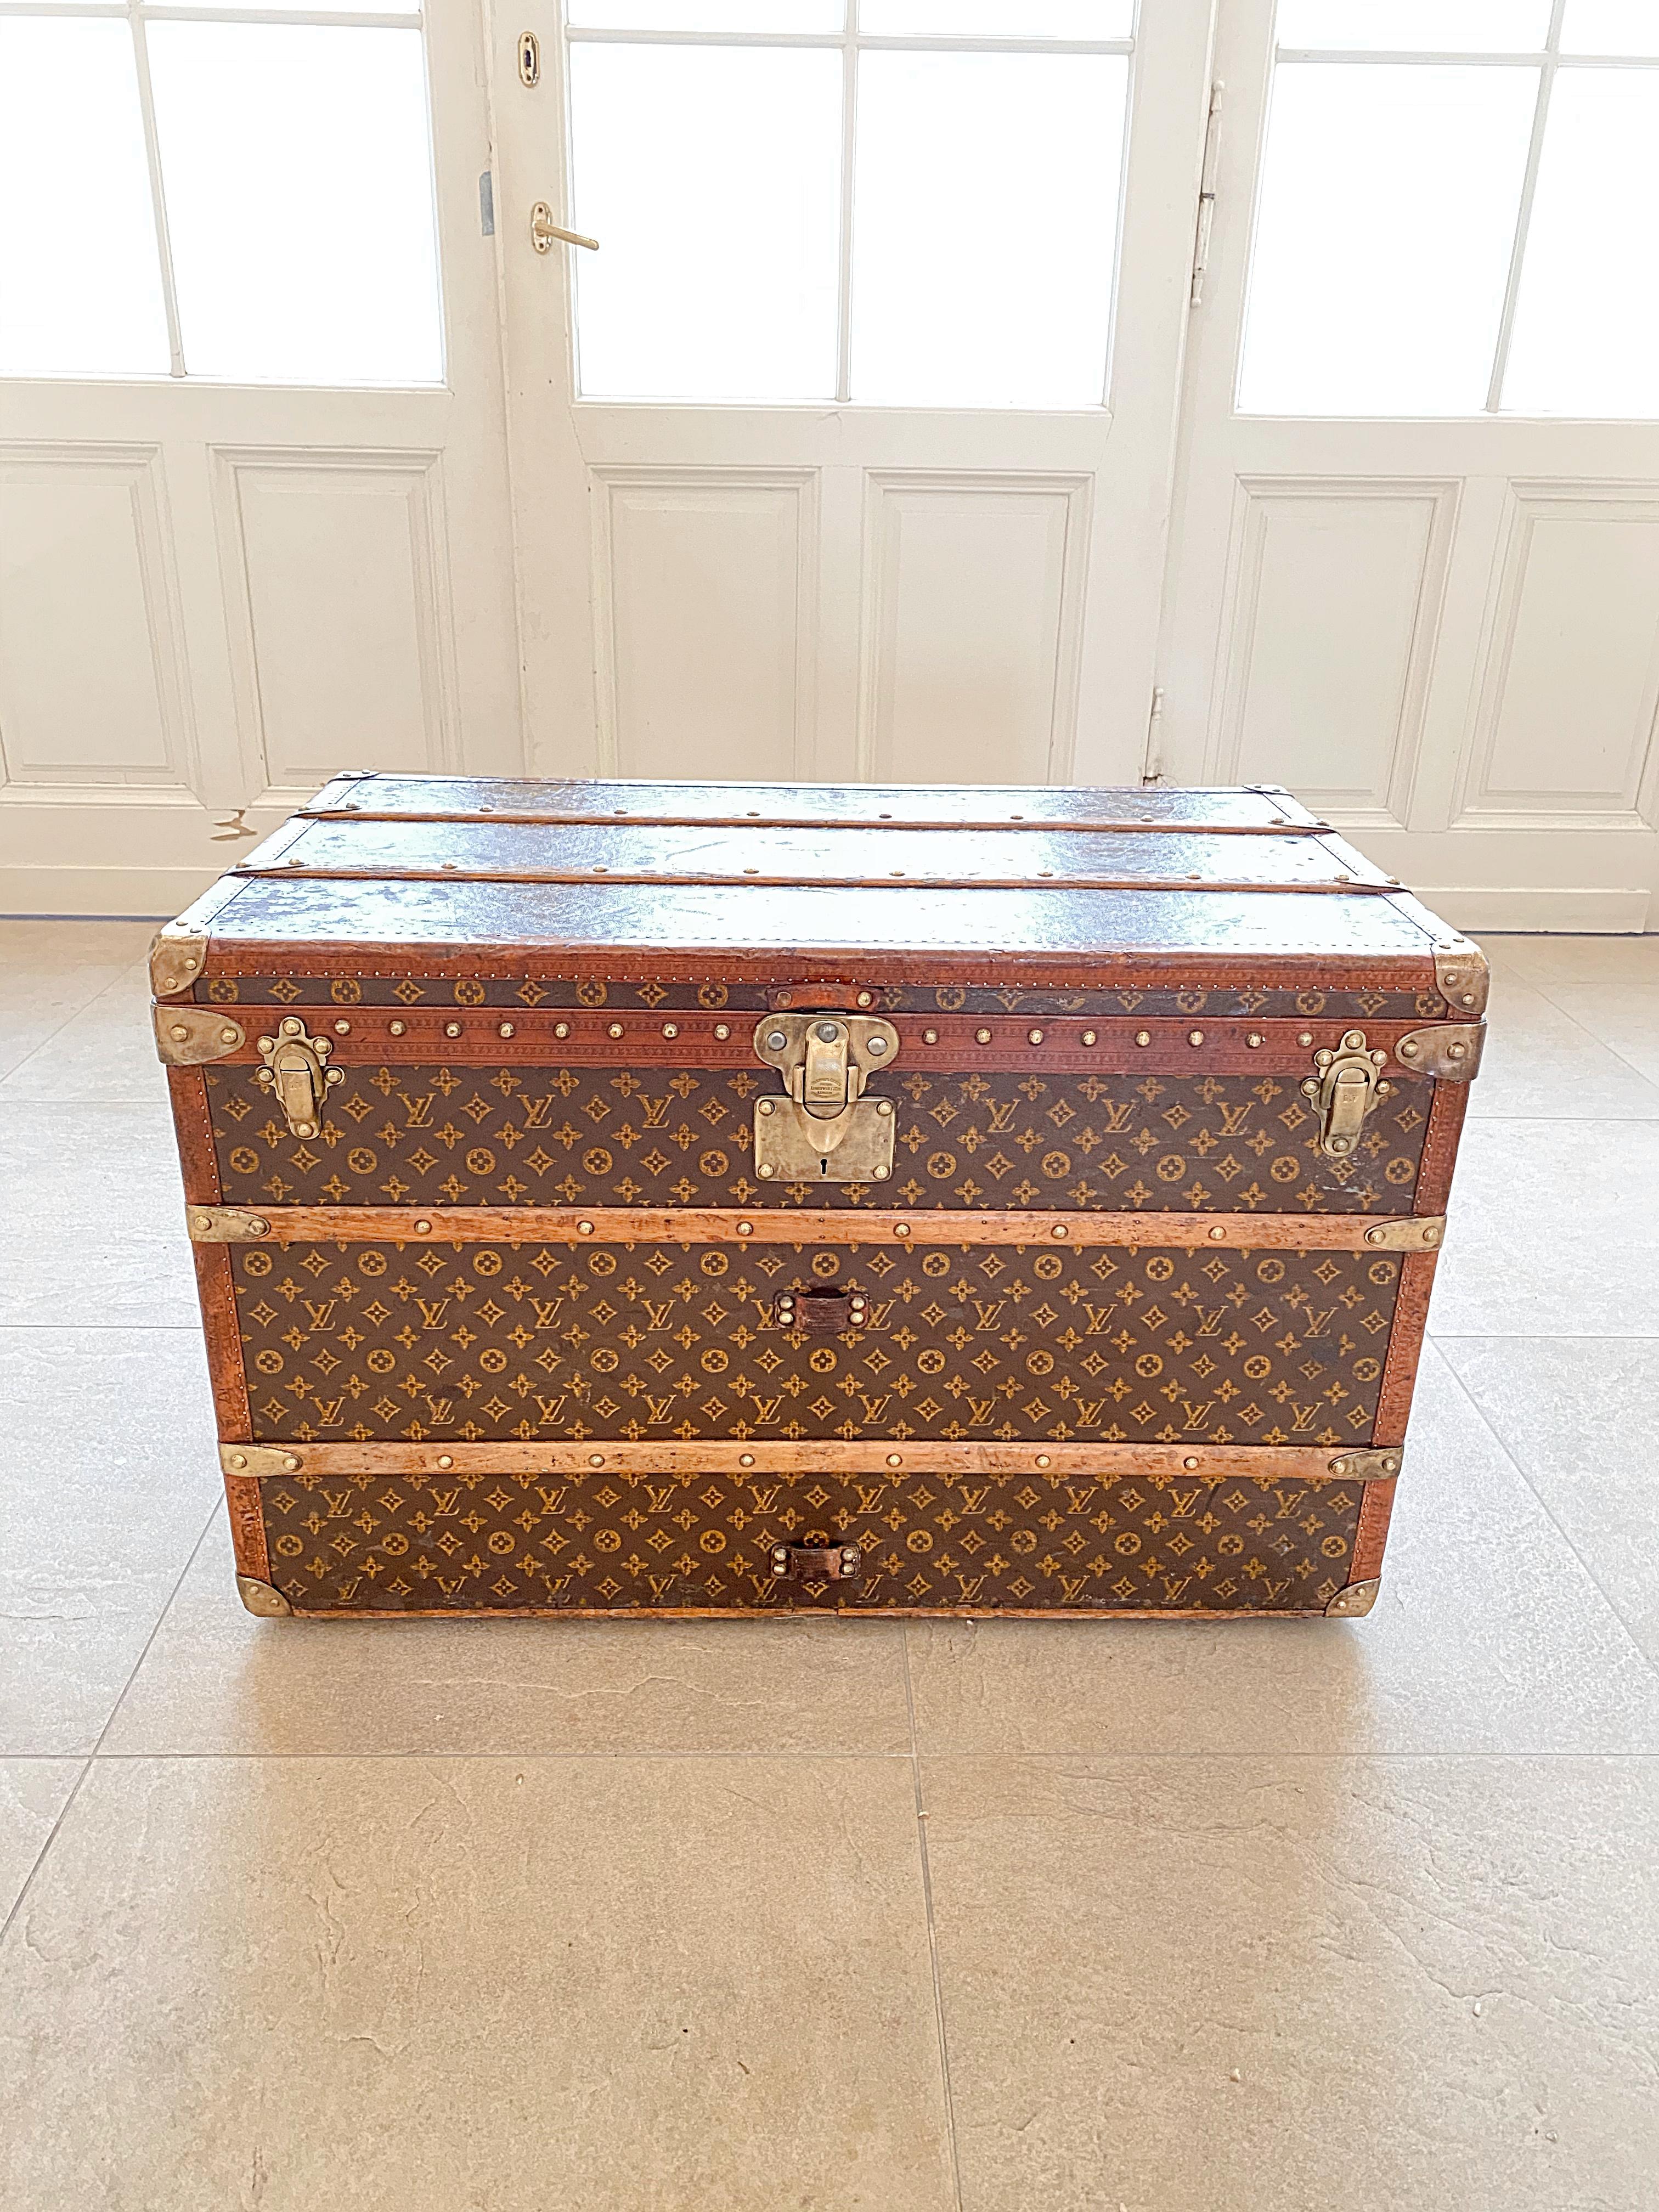 Early 1910s very rare Louis Vuitton steamer trunk handmade in France. Both sided monogram 